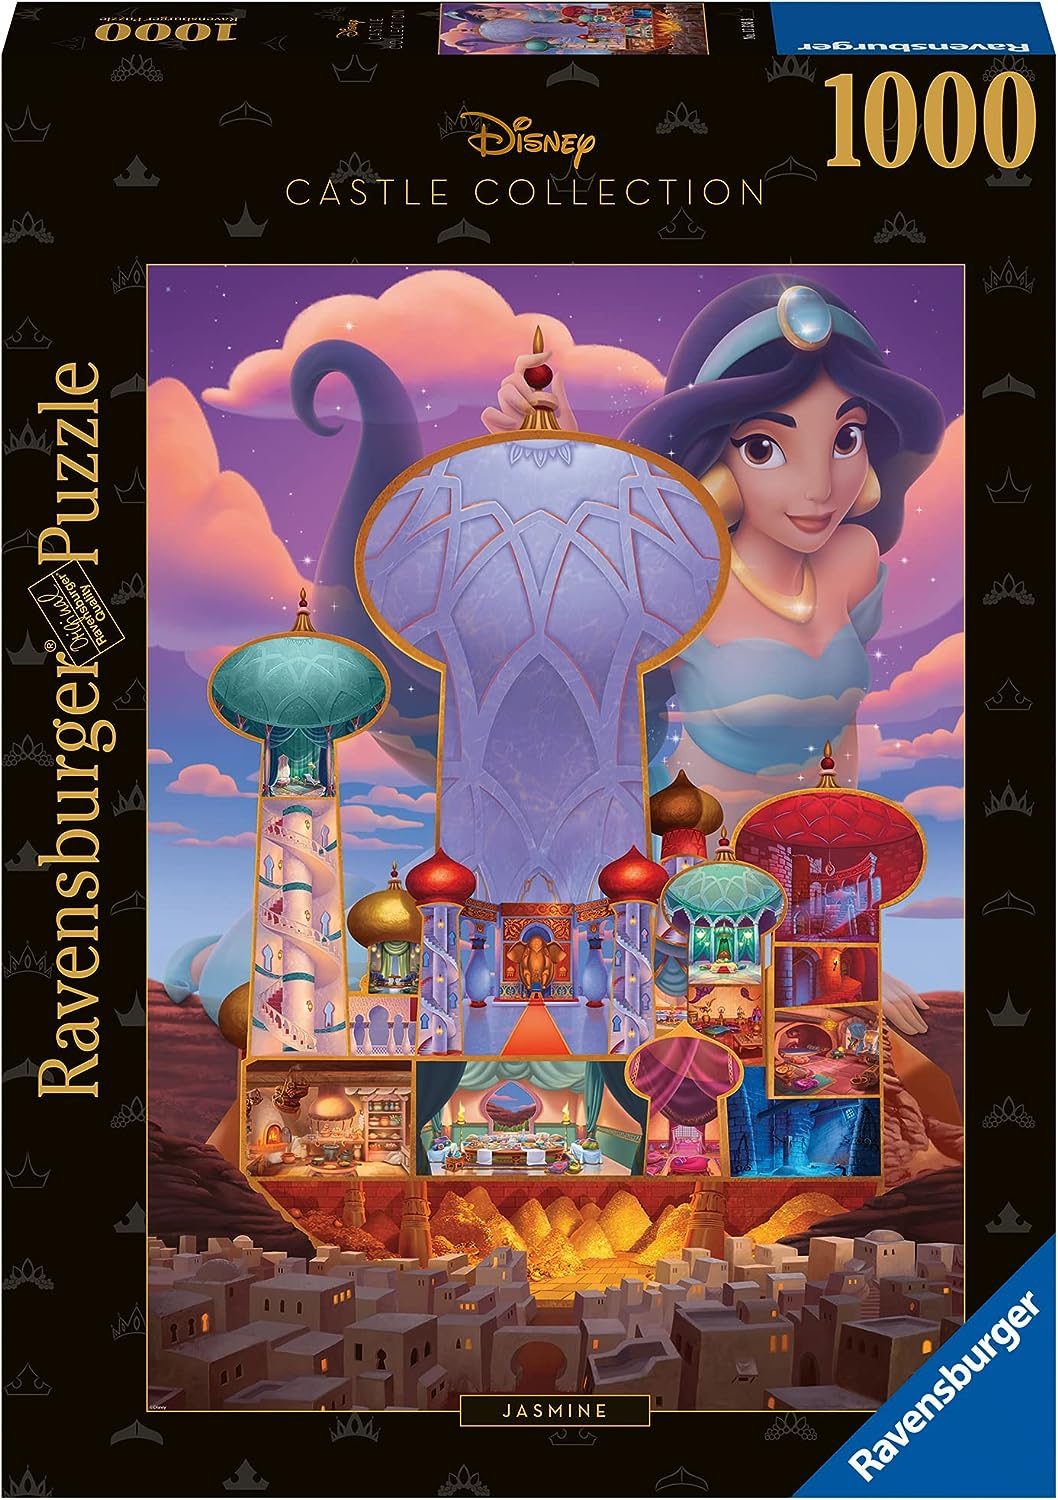 Ravensburger 17330 Collection Disney Castles Jasmine 1000 Piece Jigsaw Puzzles for Adults and Kids